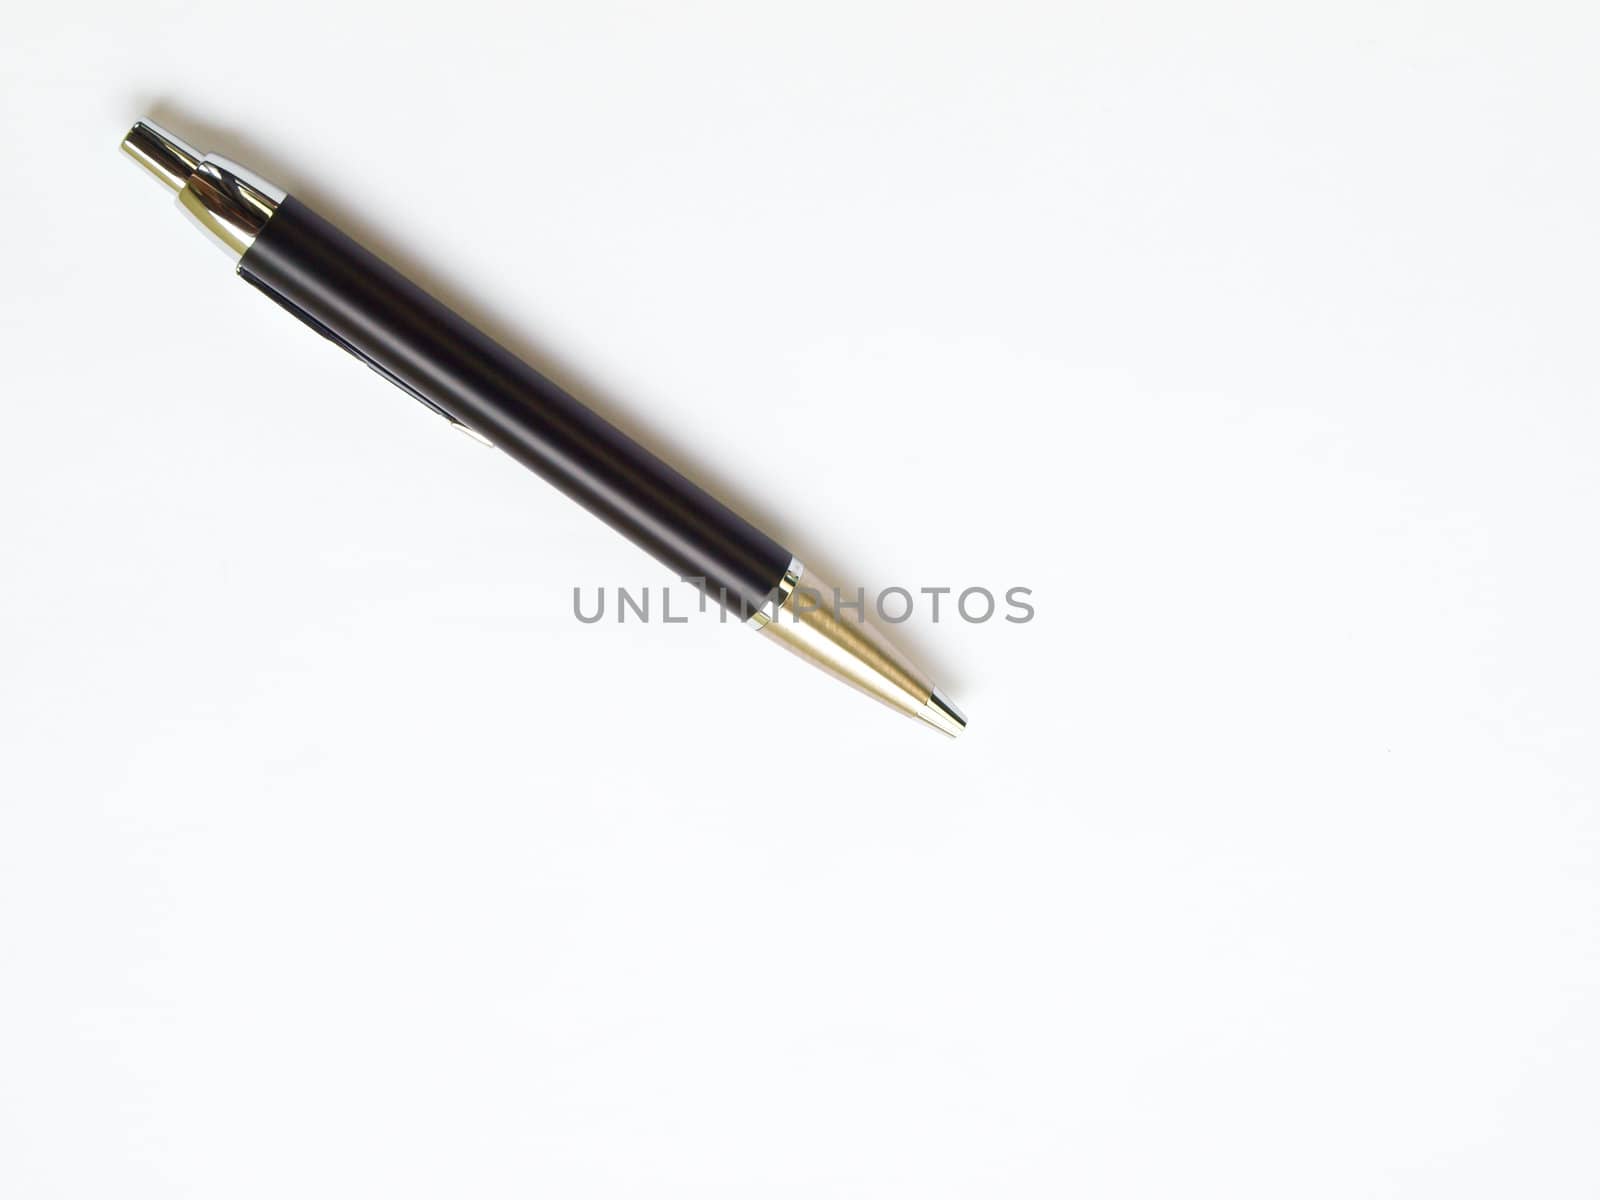 Black ball pen isolated on white background on top left